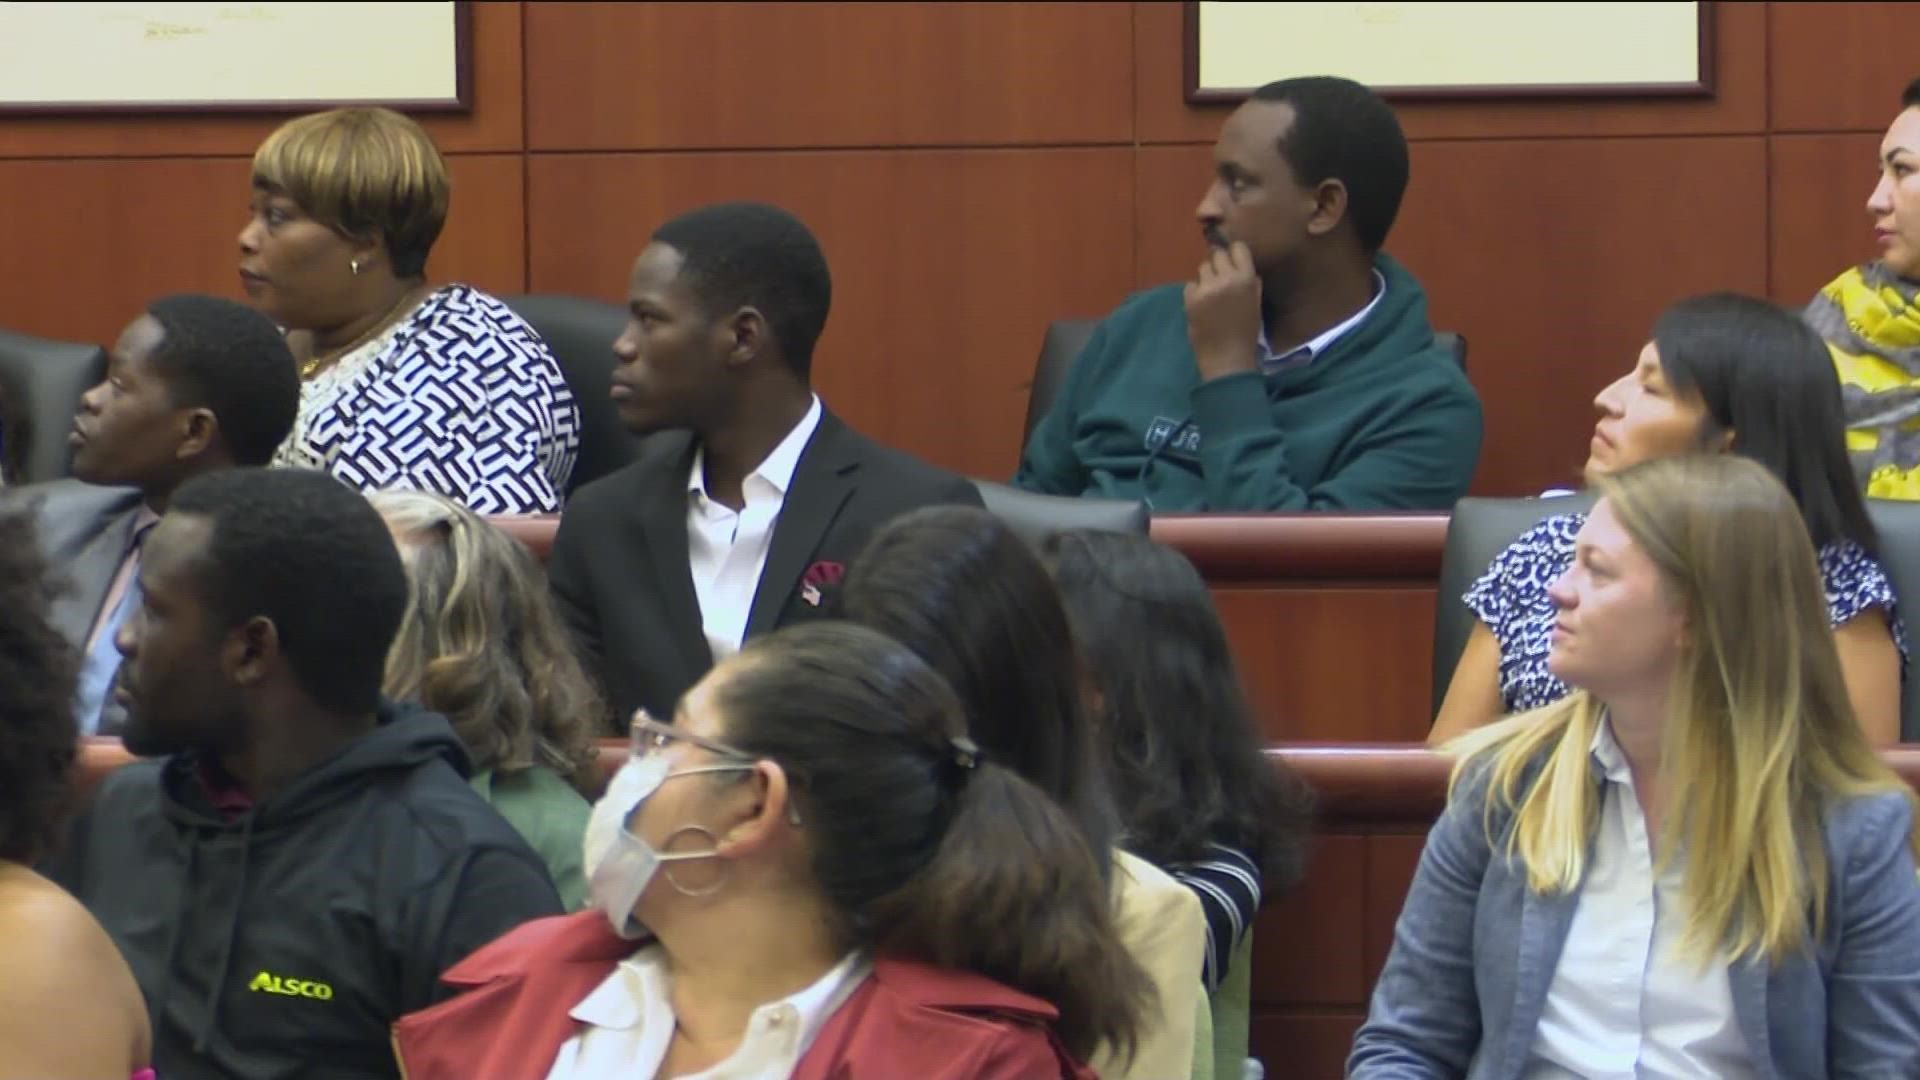 33 people from 17 different countries were sworn in at the federal courthouse Thursday to be naturalized as United States citizens.